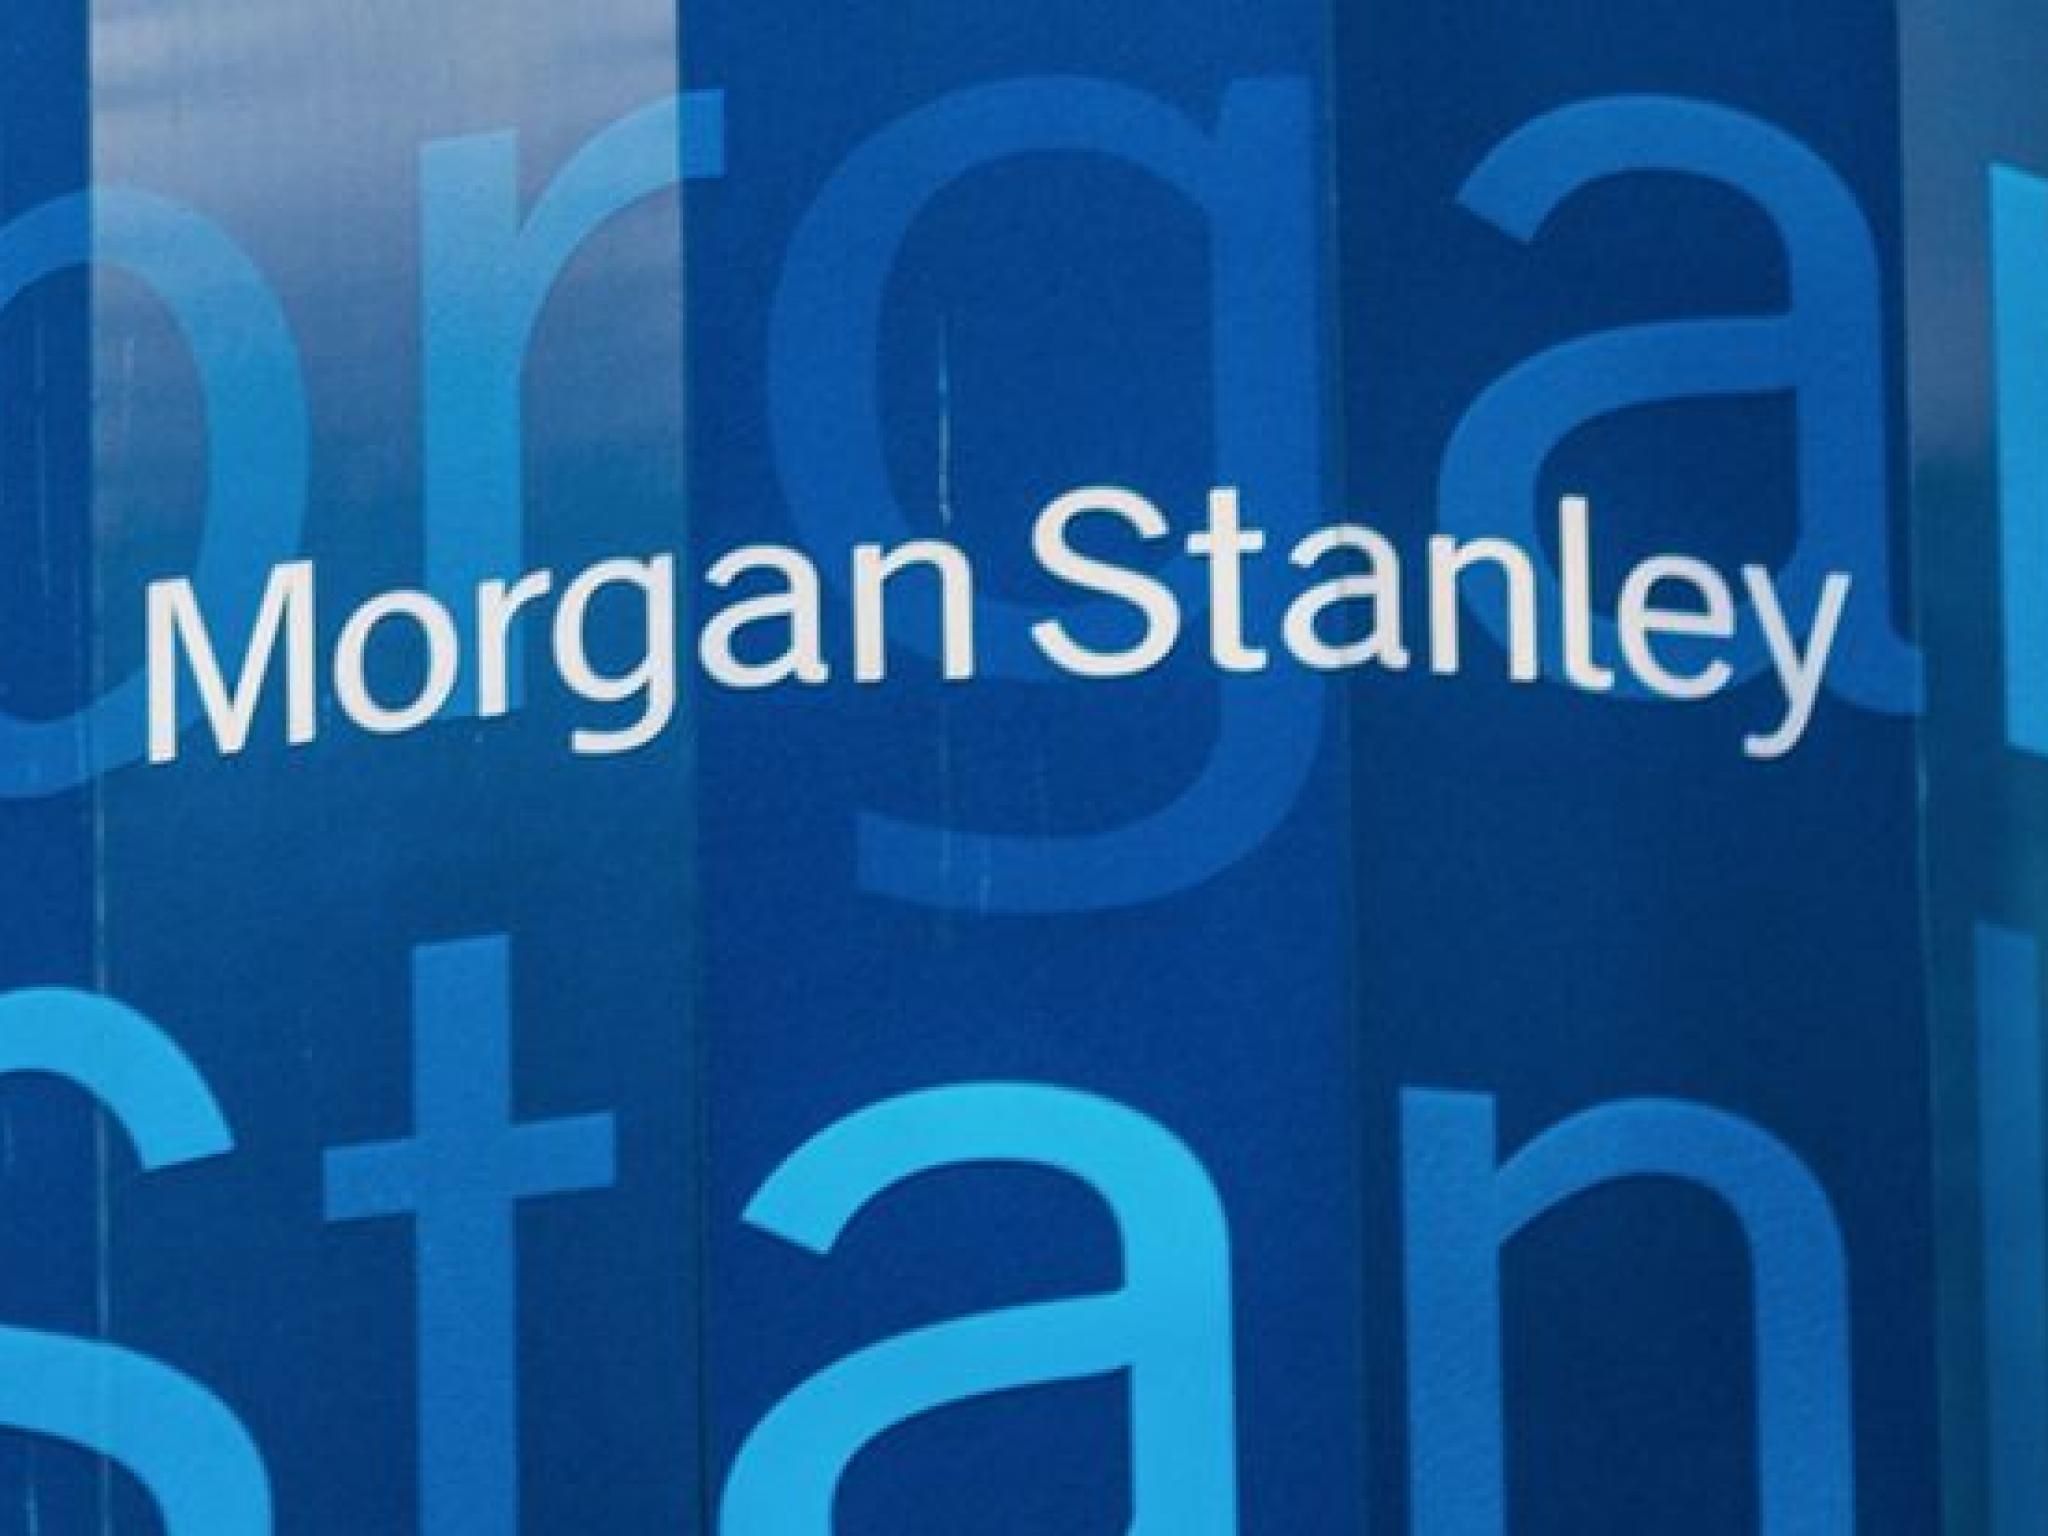  why-morgan-stanley-shares-are-trading-lower-here-are-43-stocks-moving-in-fridays-mid-day-session 